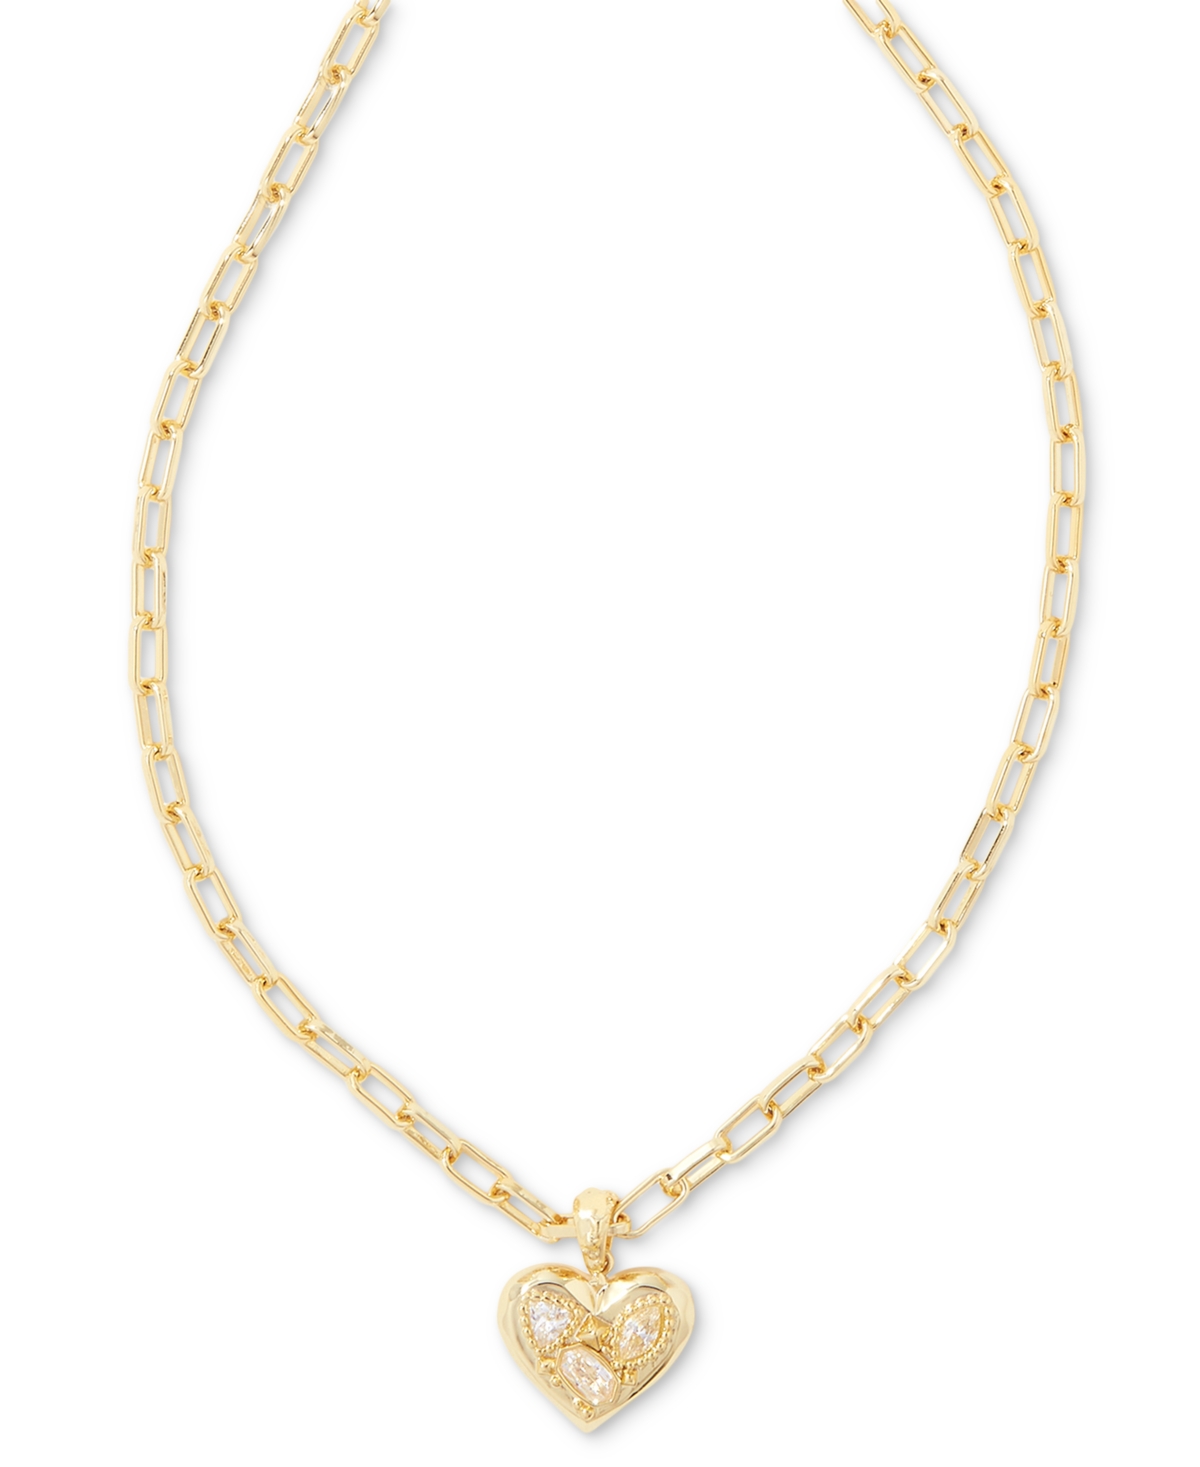 Kendra Scott Penny 14k Gold-plated Heart Short Pendant Necklace, 16" + 3" Extender In White Cz